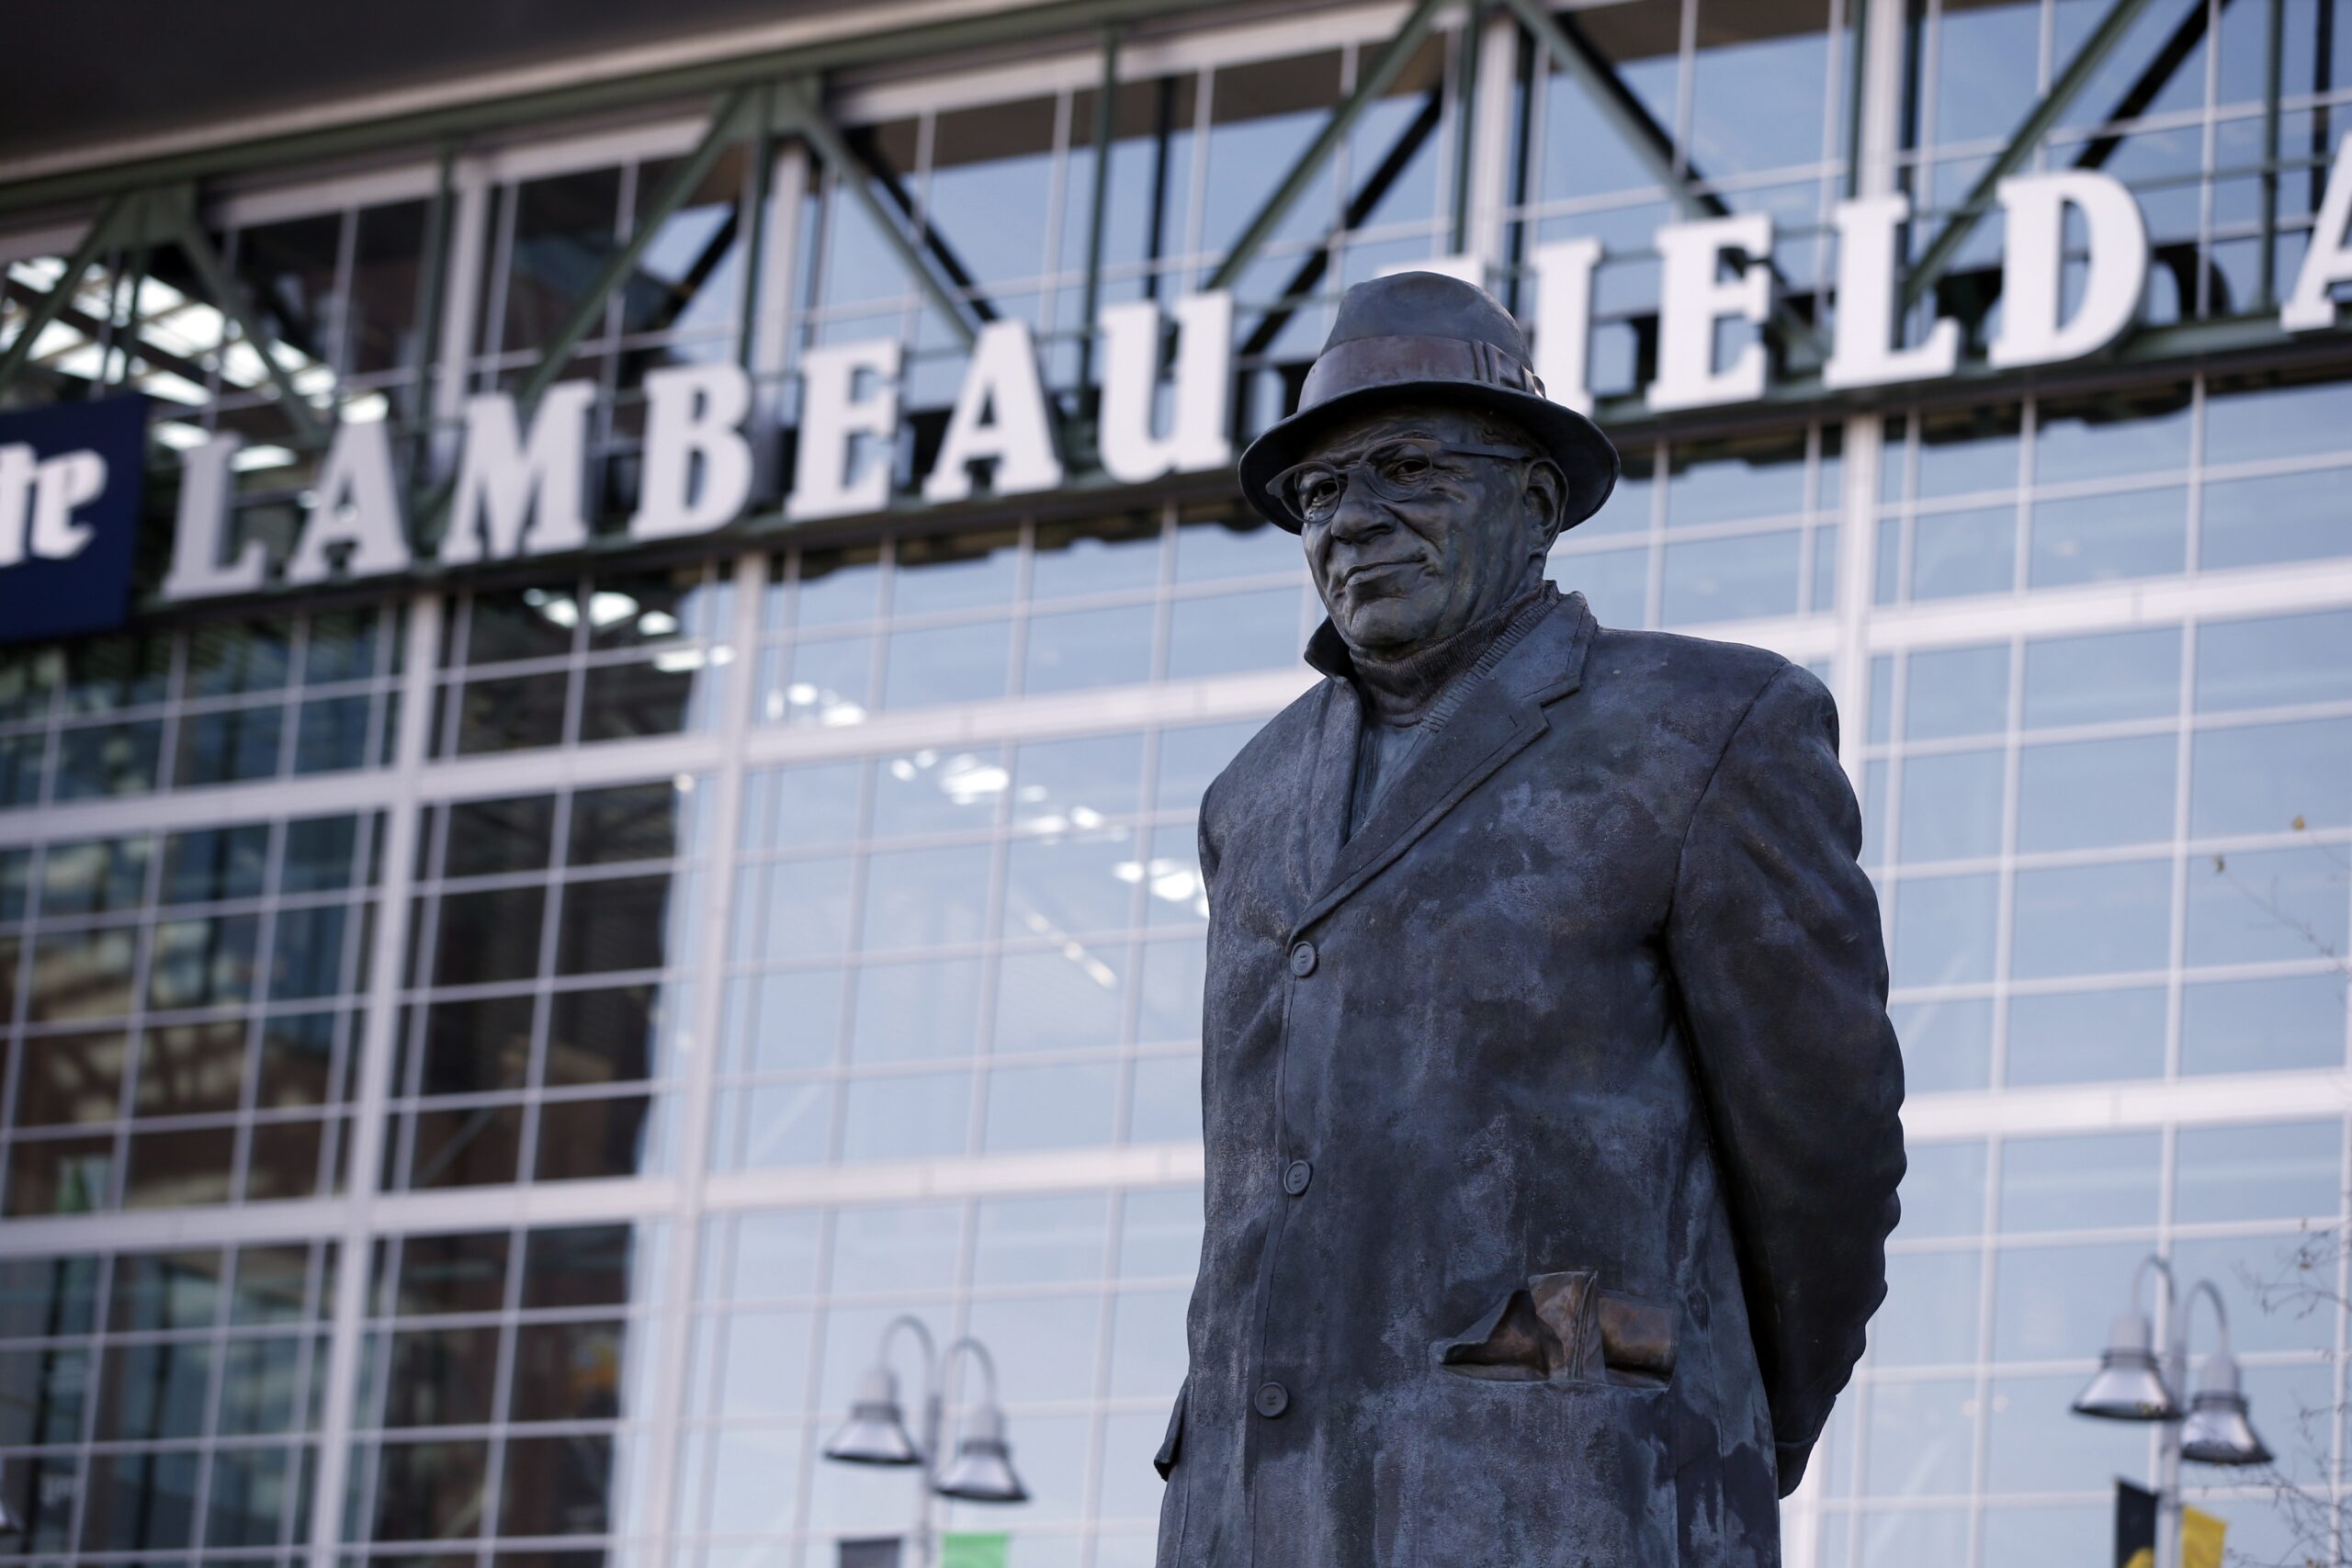 Statue of former Green Bay Packers head coach Vince Lombardi stands outside of Lambeau Field